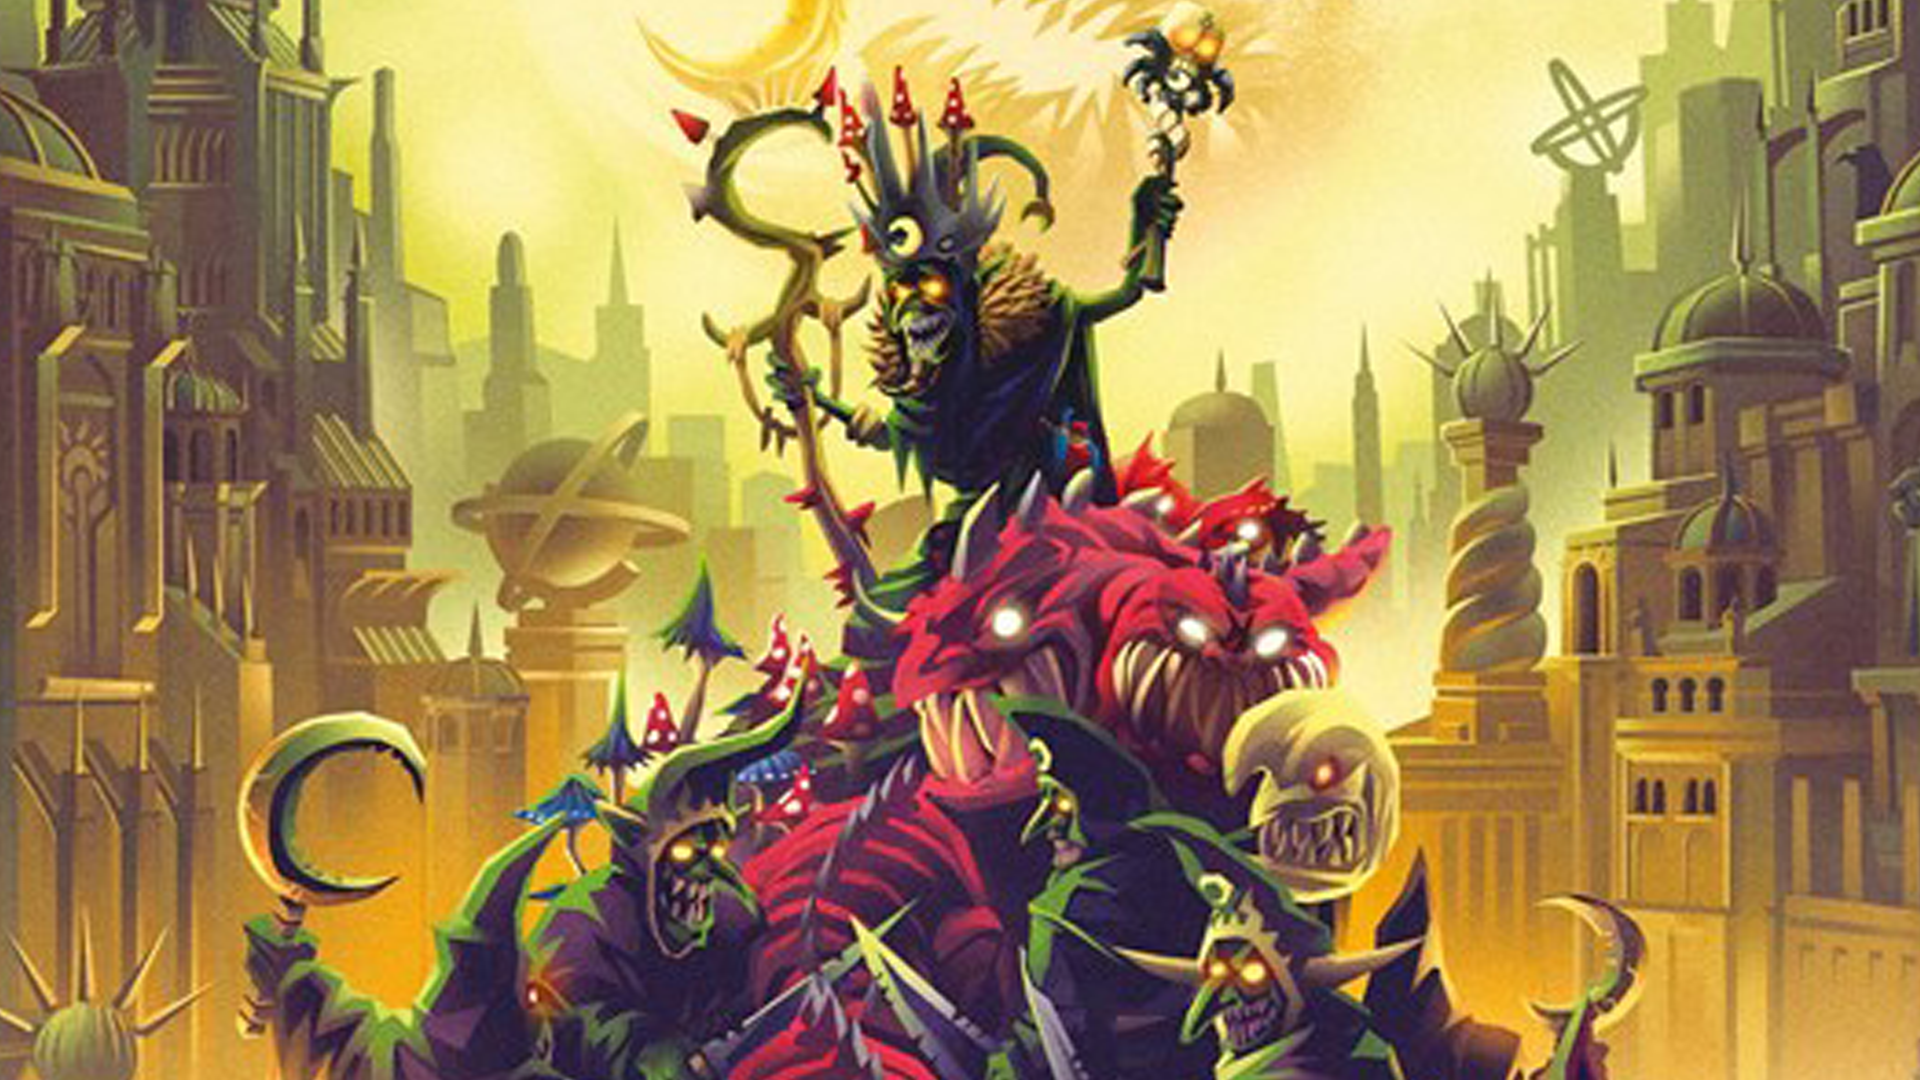 The front cover for the Age of Sigmar book Gloomspite